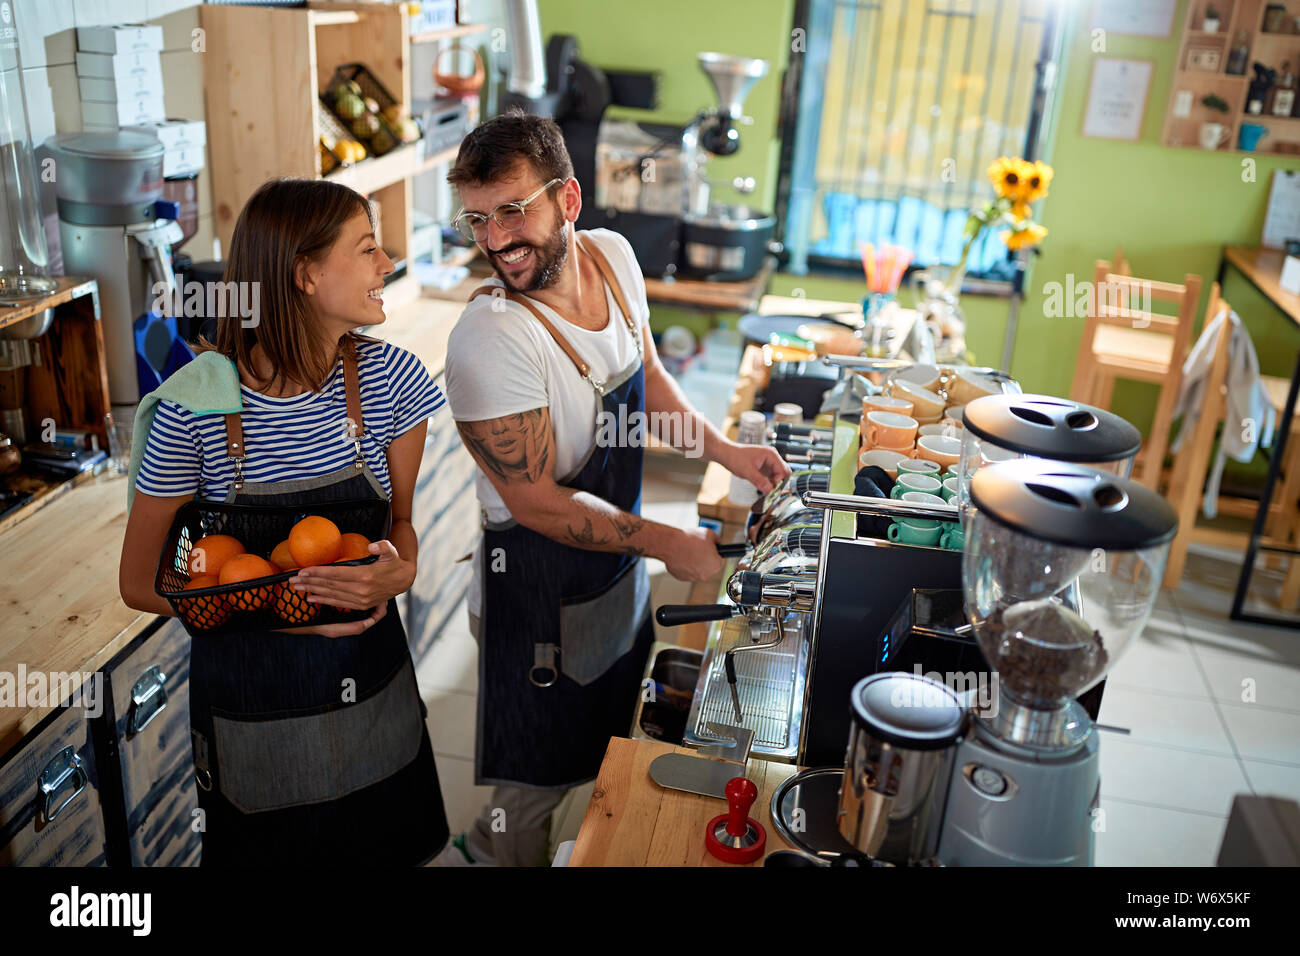 Smiling couple barista working at coffee shop Stock Photo